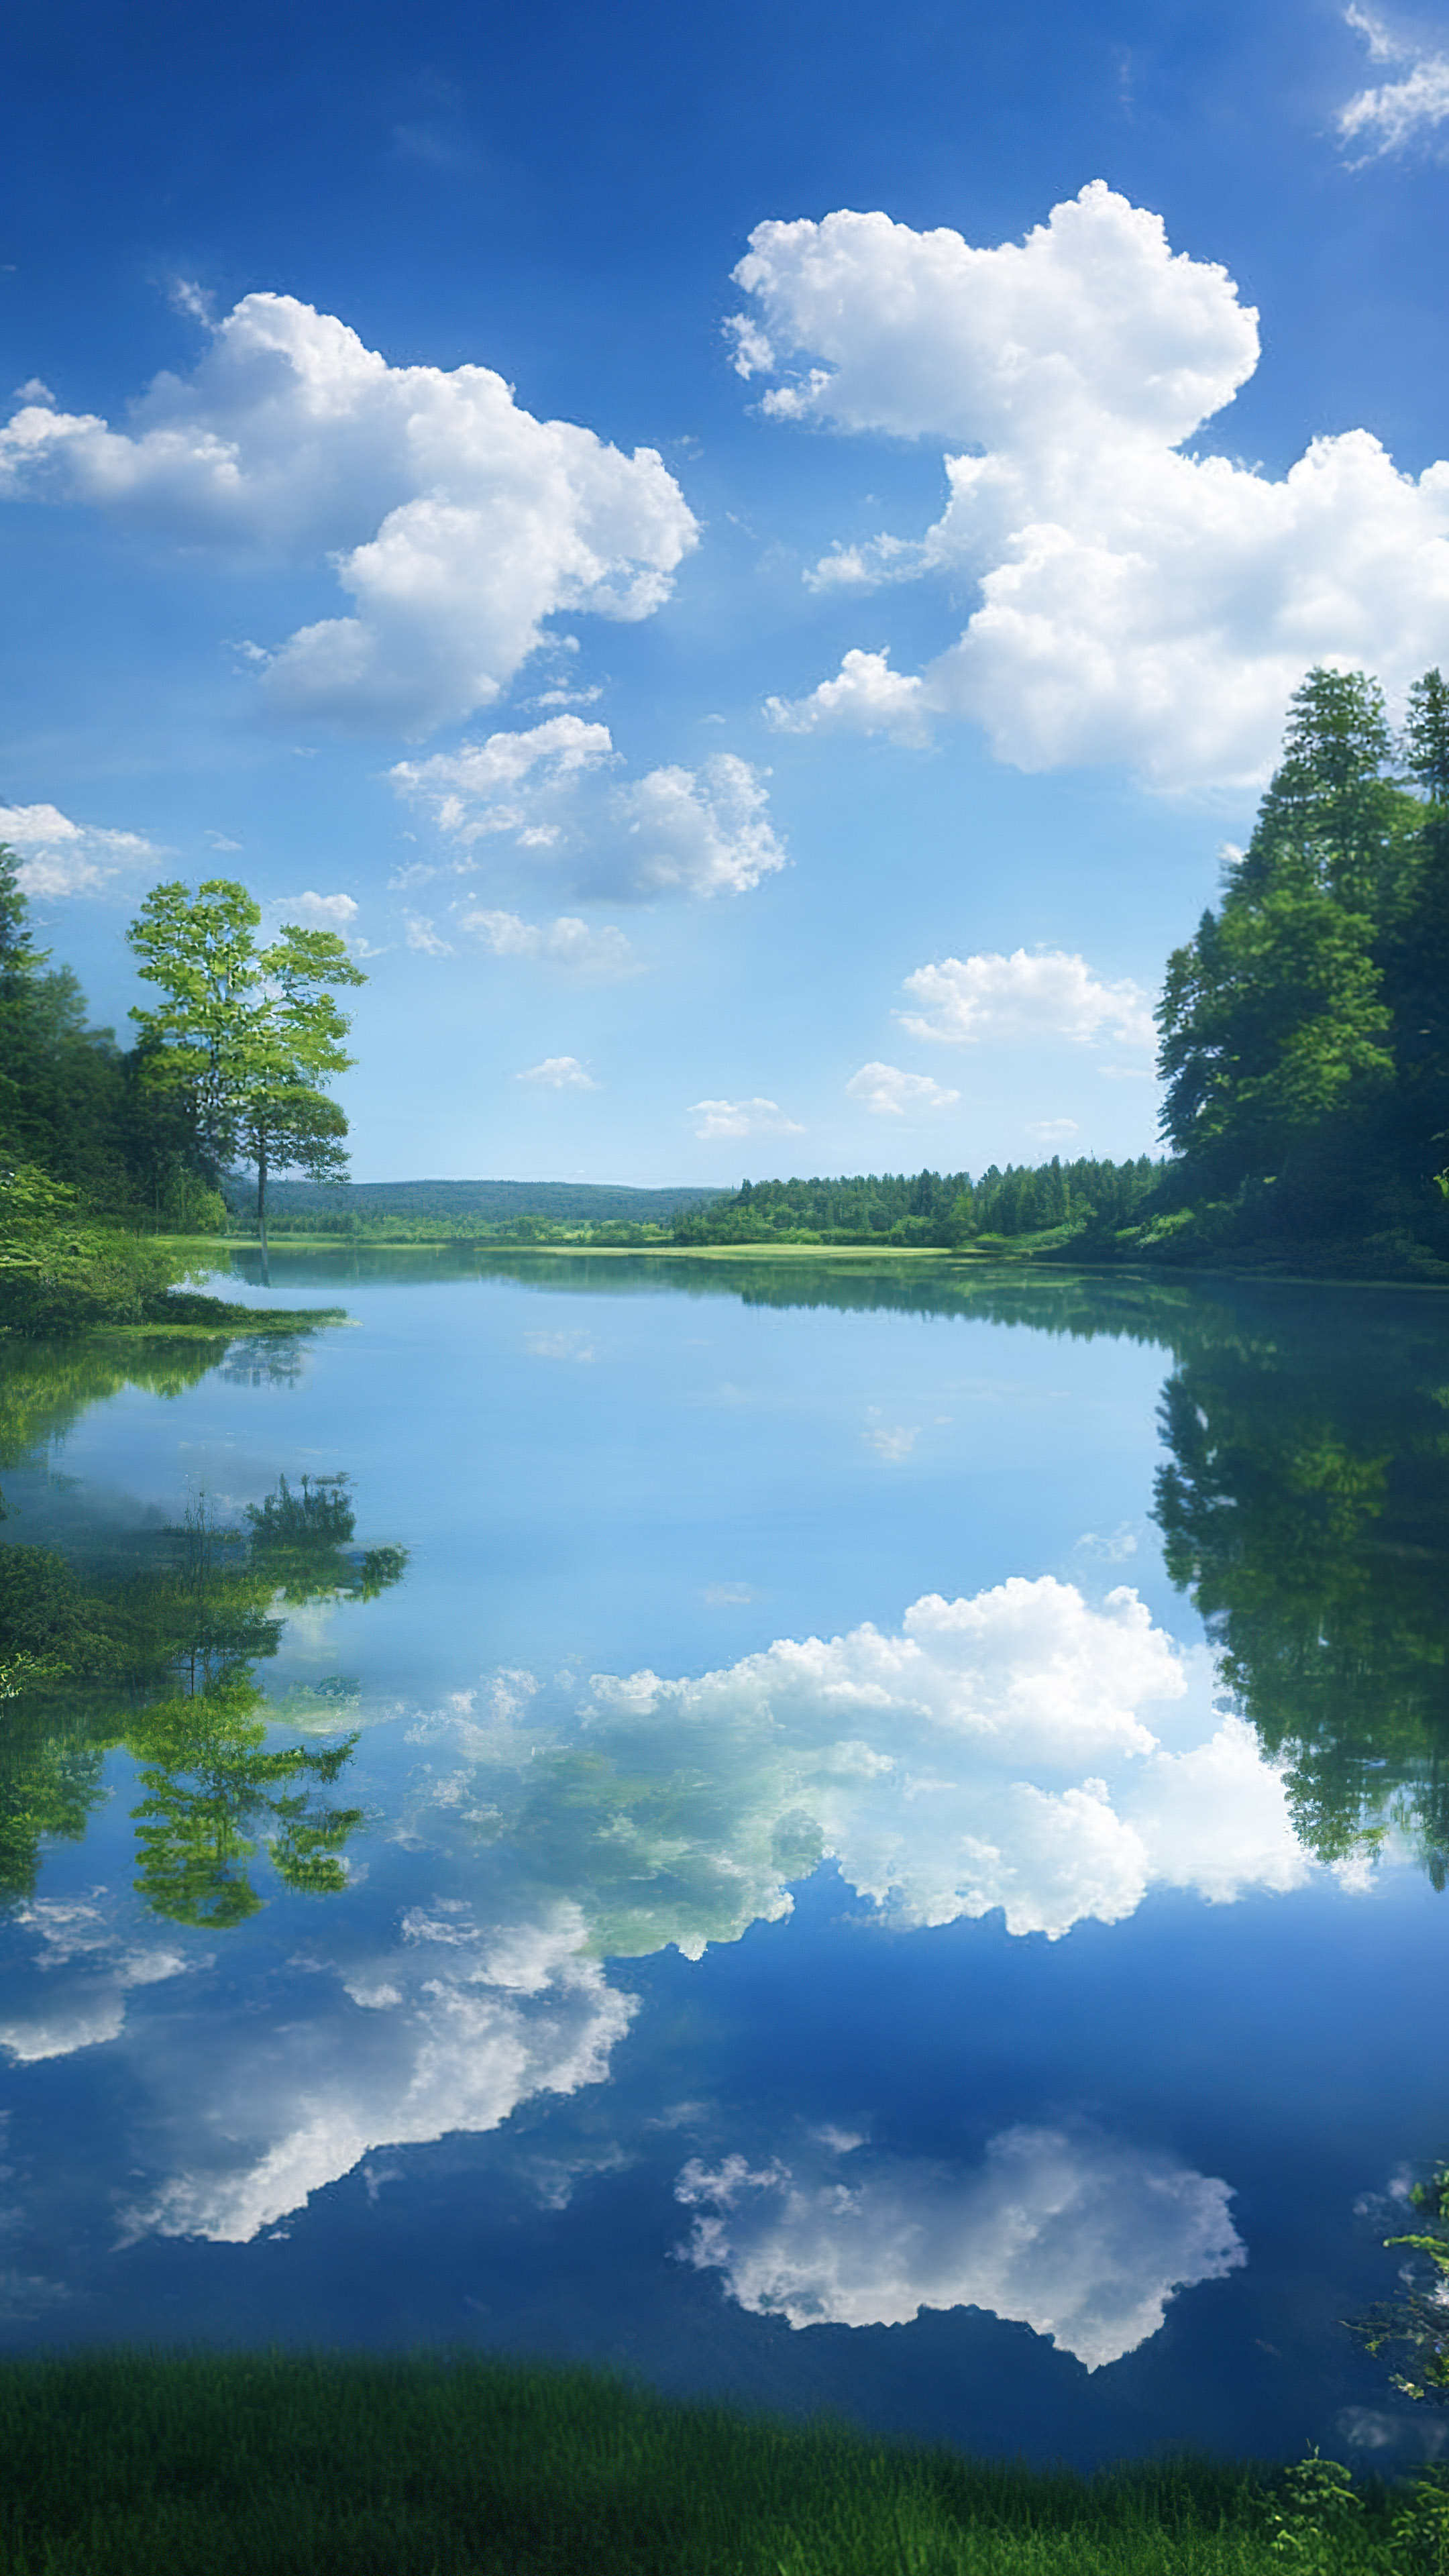 Download this serene blue sky wallpaper and transform your device’s background into a serene lake reflecting a cloud-dappled sky, surrounded by lush, green forests.